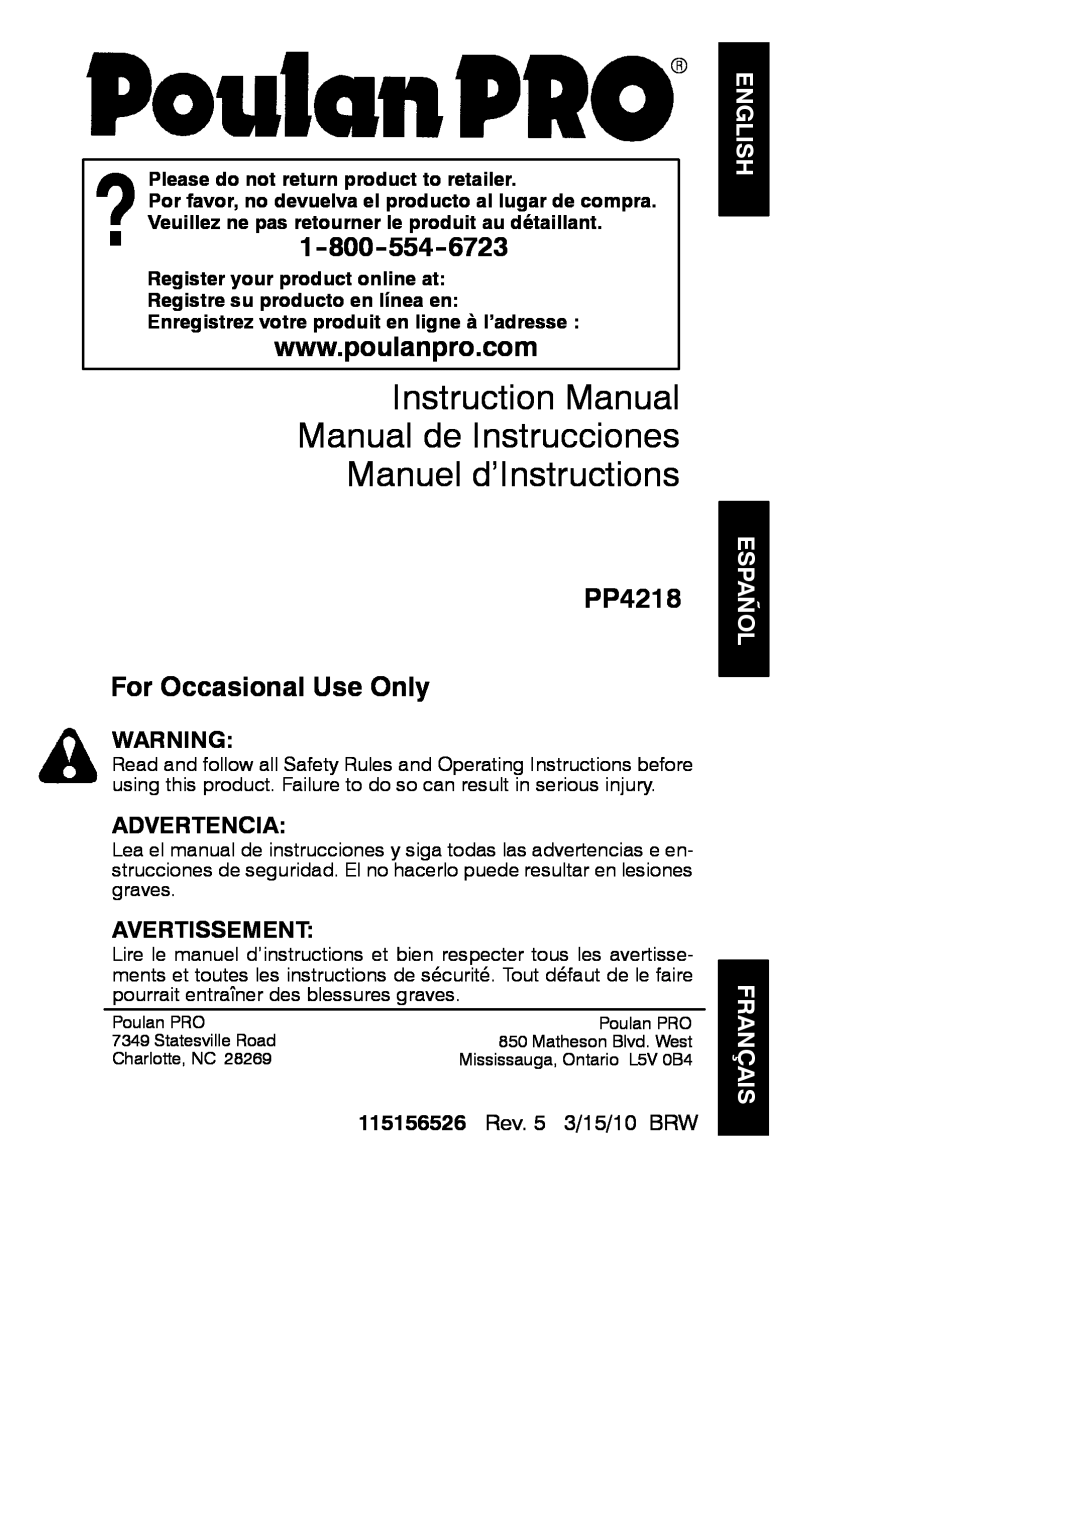 Poulan 966063101 instruction manual English Español Français, PP4218 For Occasional Use Only, Advertencia, Avertissement 